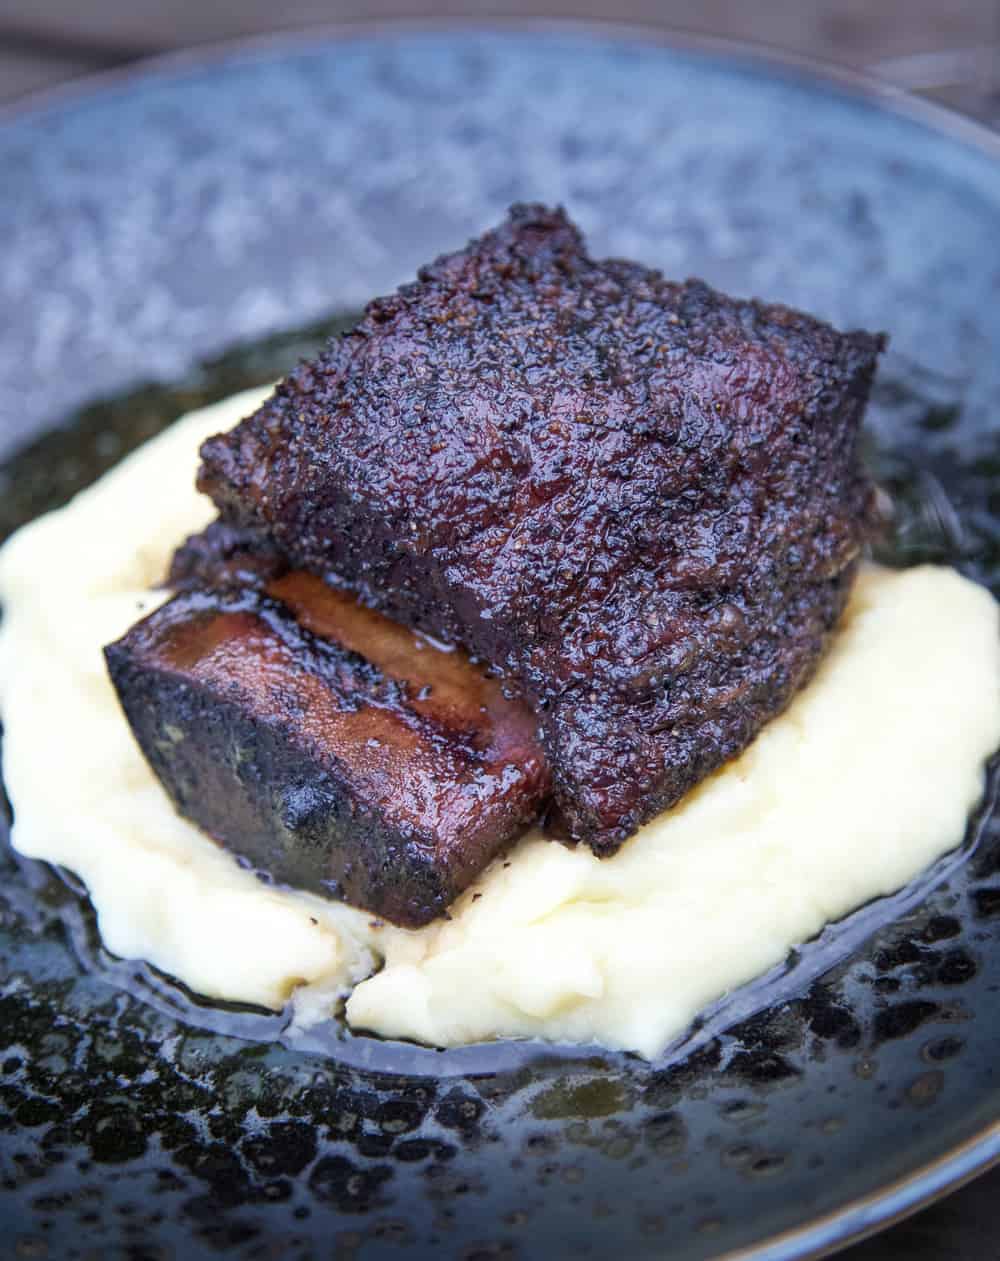 Smoked Beef Short Ribs over parsnip puree.